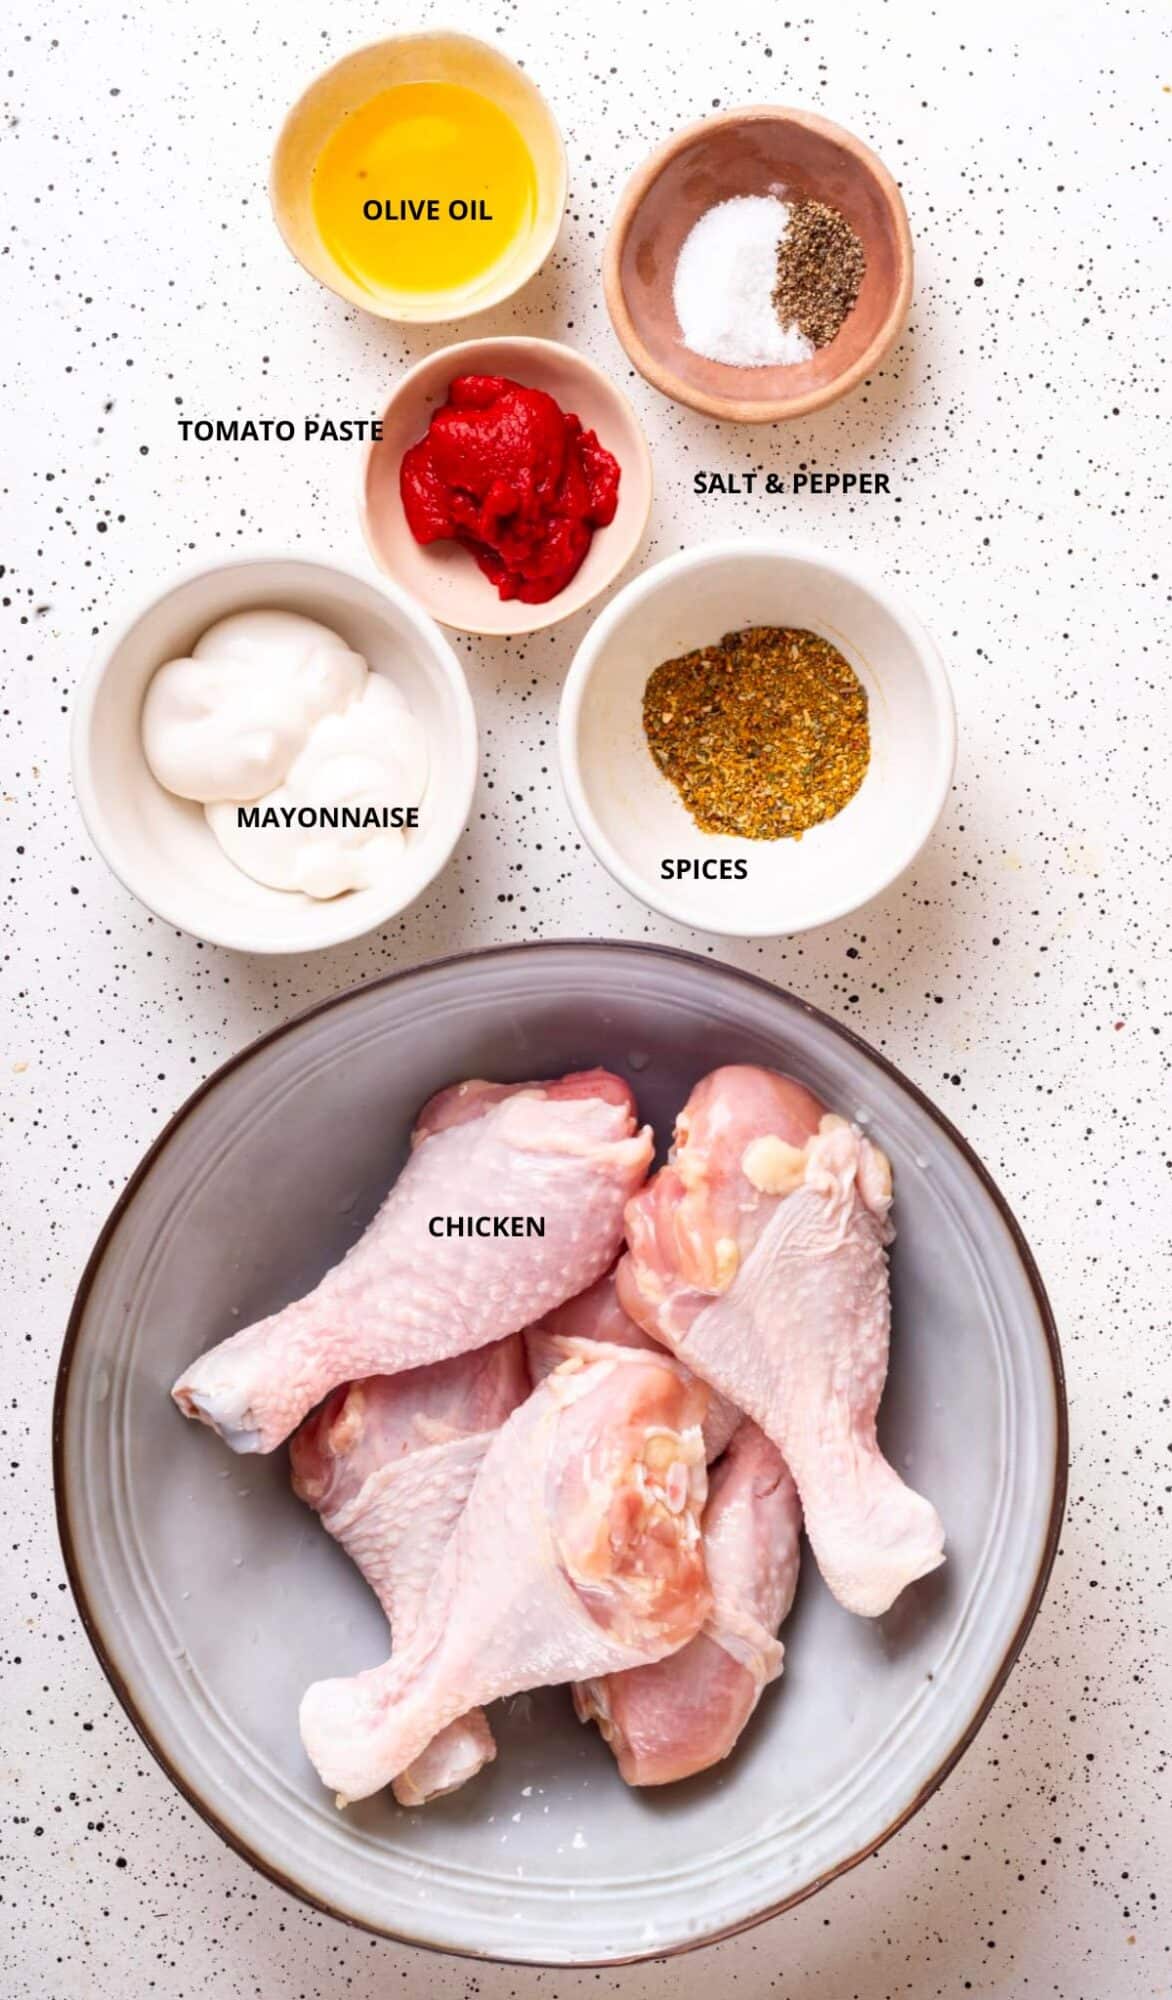 marinated montreal baked chicken recipe ingredients olive oil salt pepper tomato paste mayonnaise spices and chicken.